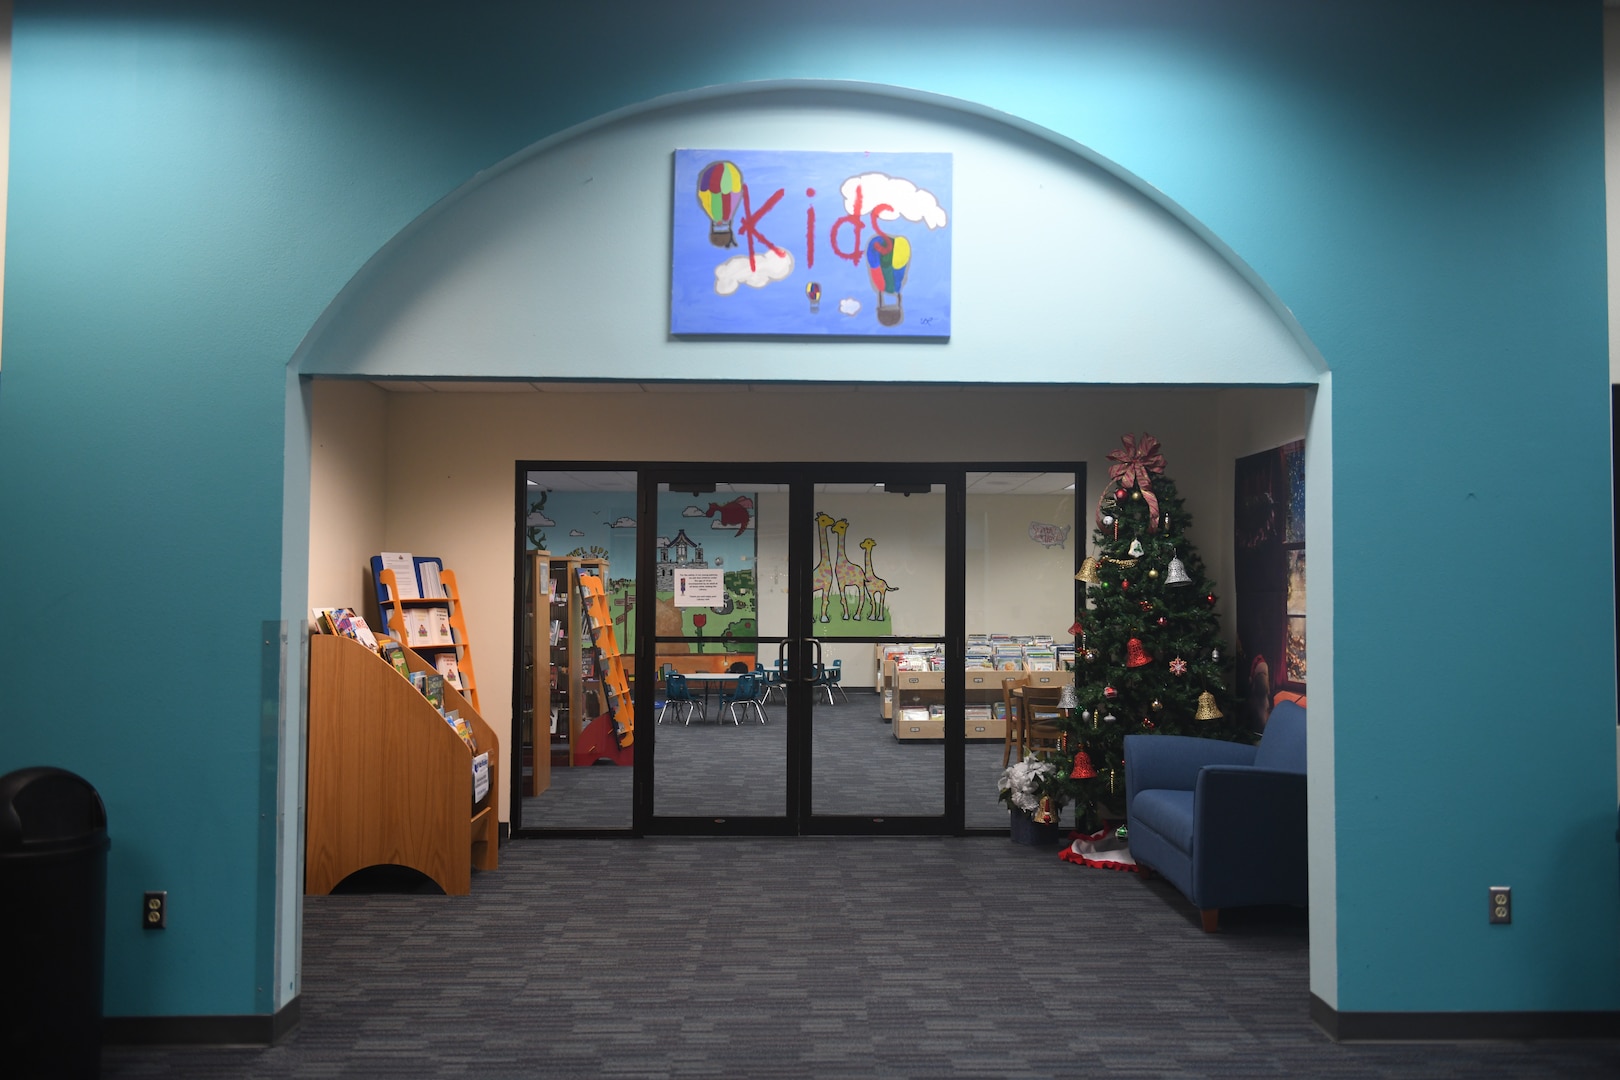 The entrance way to the children’s area of the Joint Base San Antonio-Randolph Library, Texas, with new carpet and book bins Dec. 5, 2019. There will be new signage and nooks and crannies that will be quieter. “We’re just trying to improve service here and make people more comfortable,” said Diana Lisenbee, supervisory librarian.